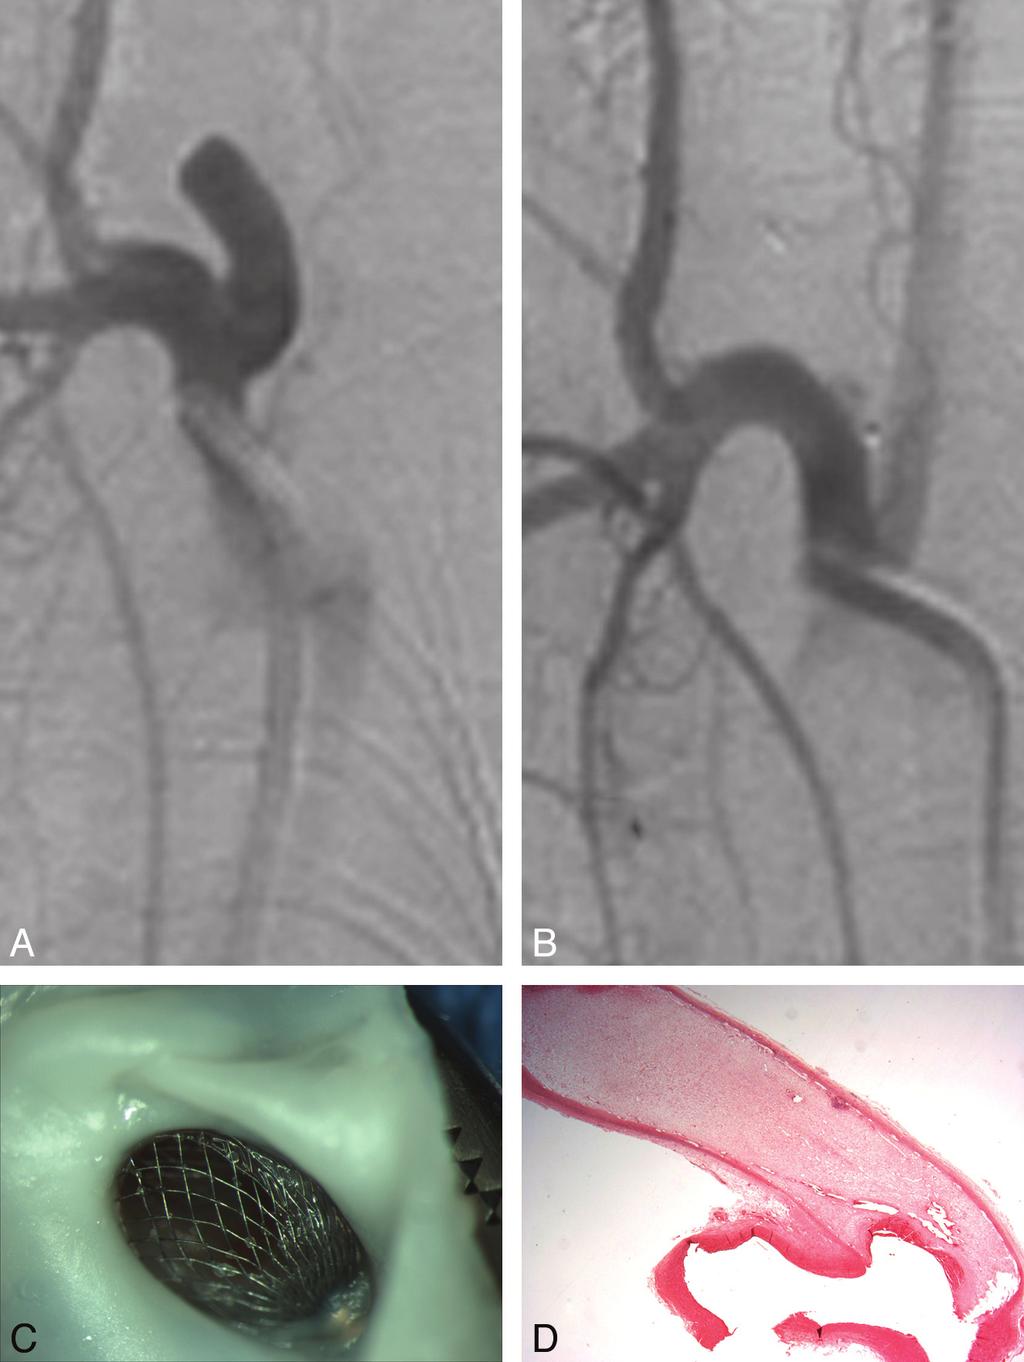 Fig 3. Representative images from case 2 in the Table. A, DSA before treatment shows the aneurysm. B, Image at sacrifice shows a small remnant at the neck.